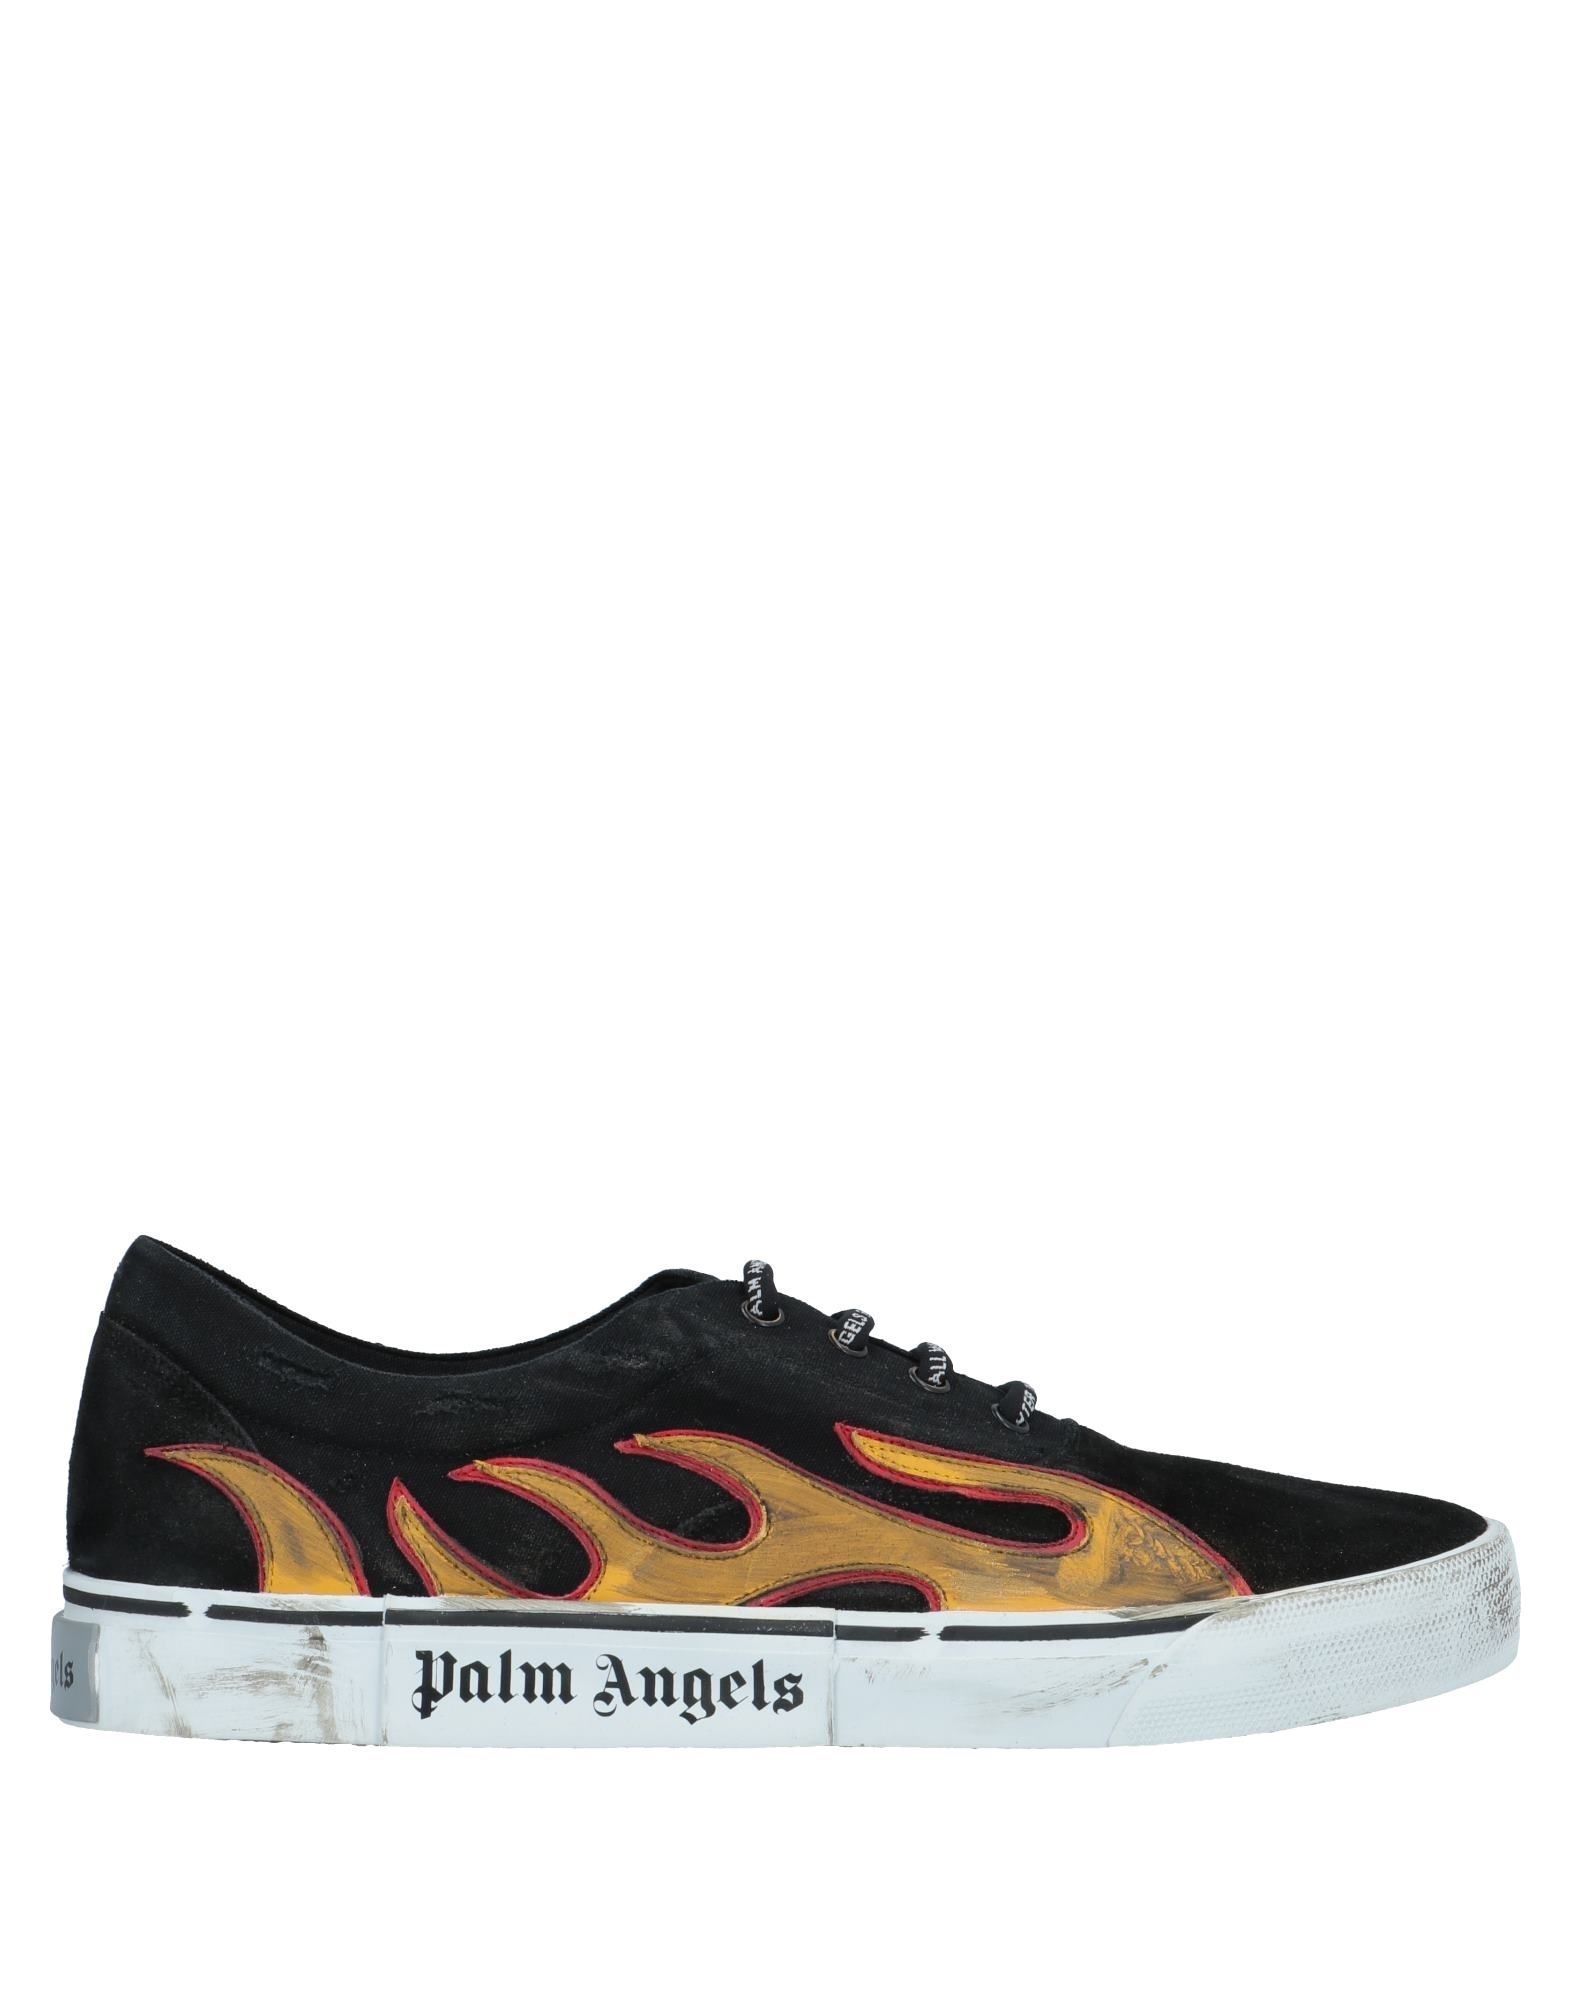 PALM ANGELS Sneakers,11680494CI 3